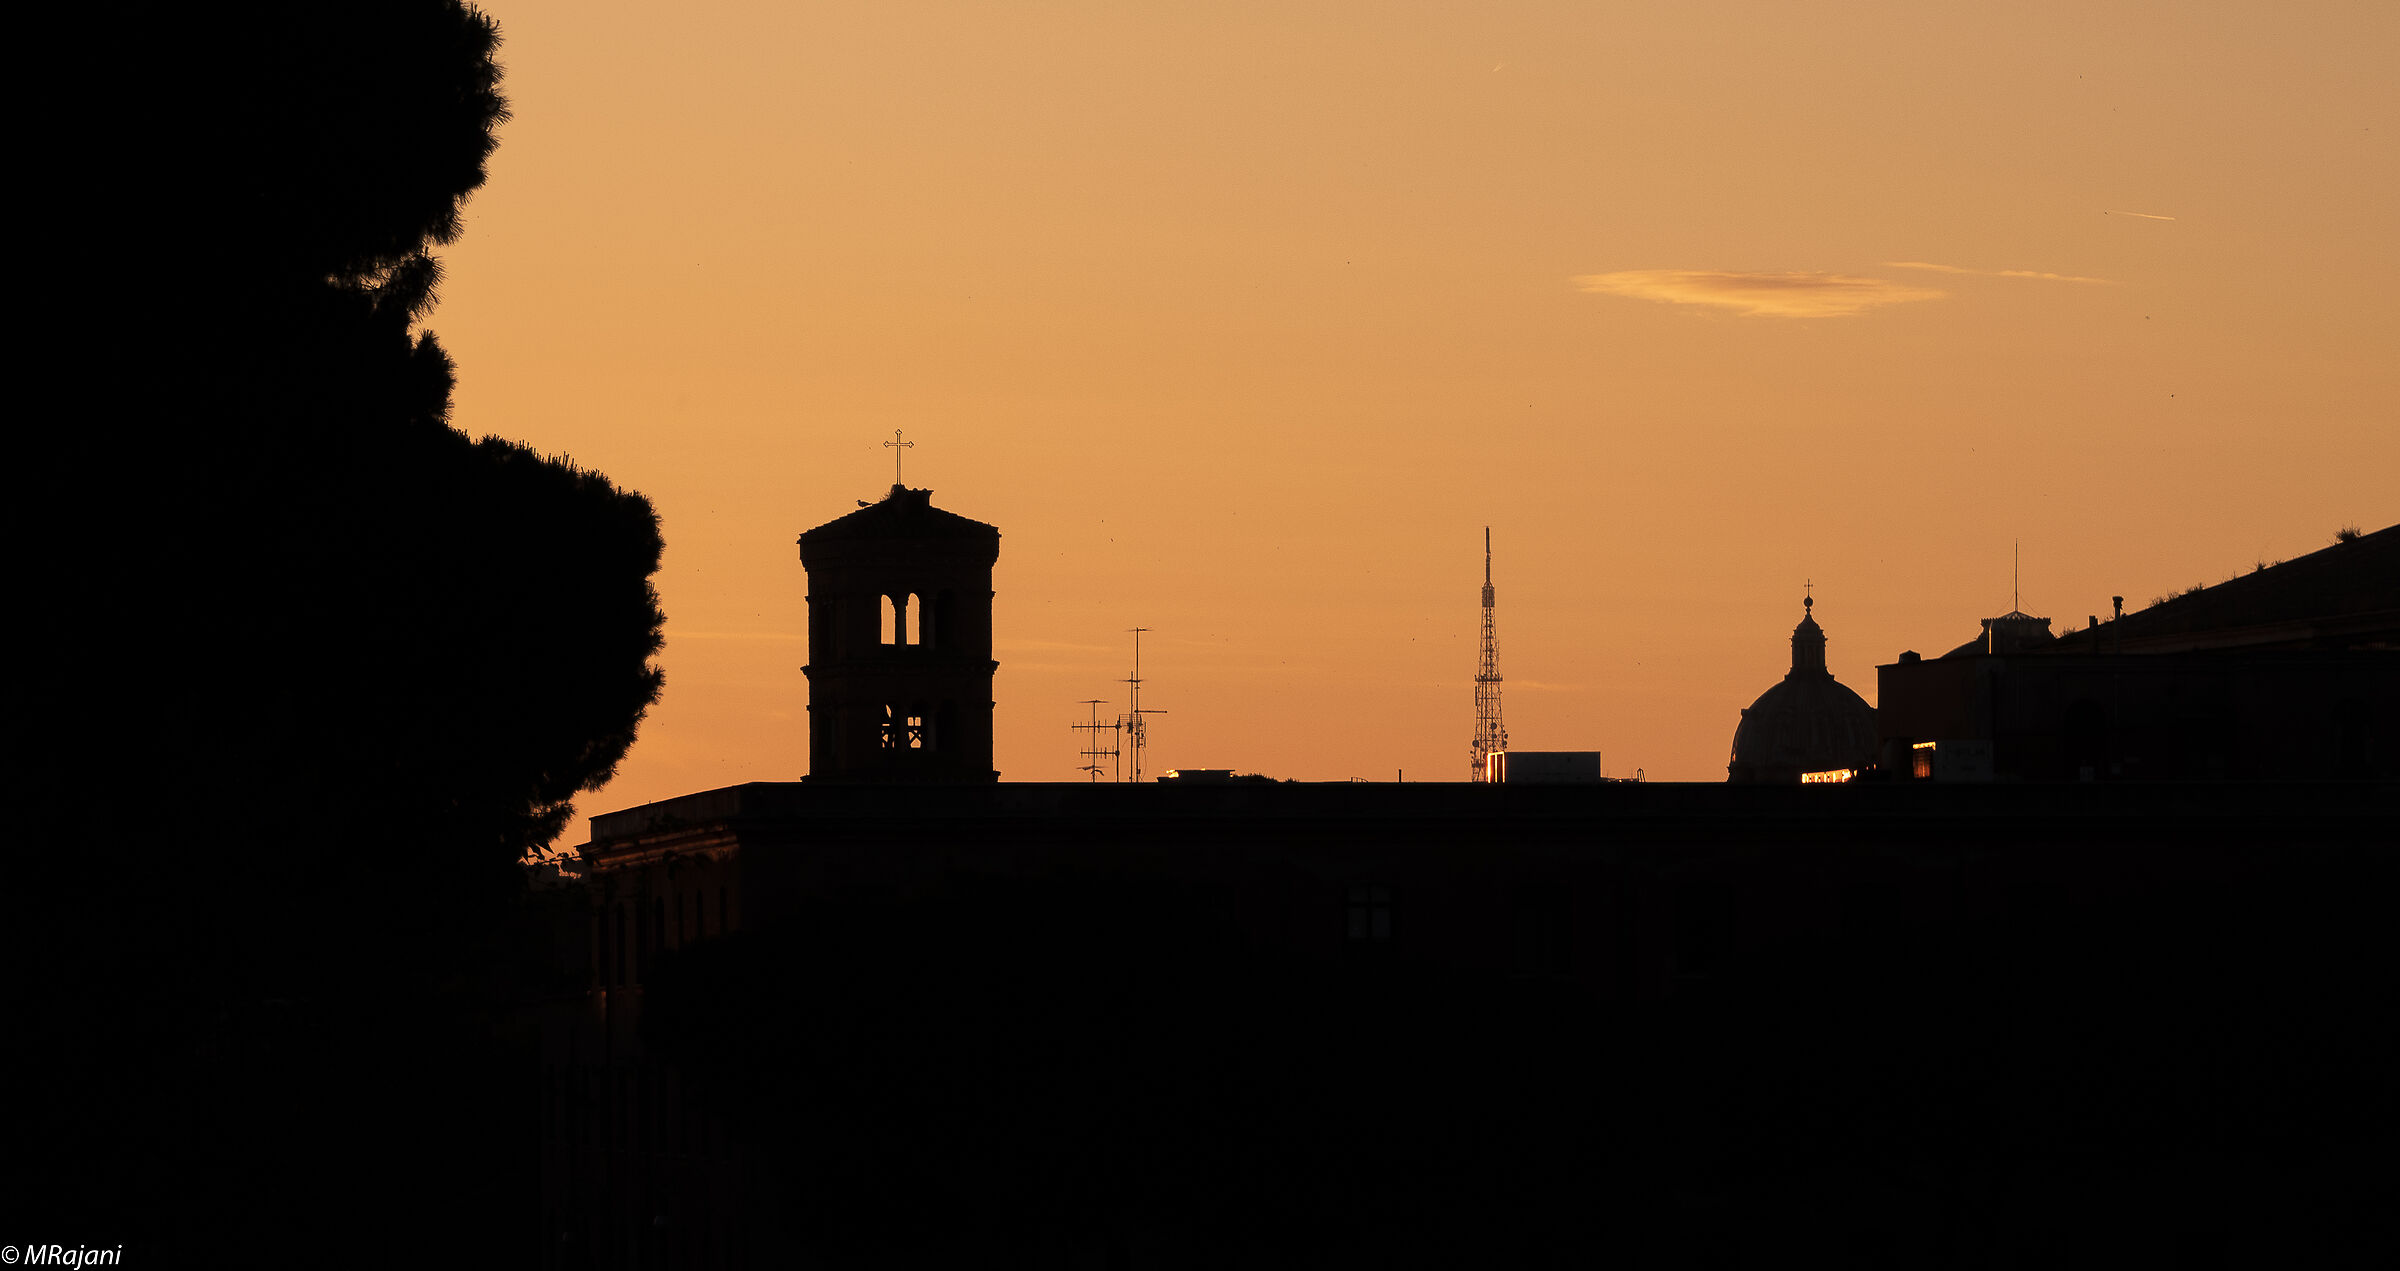 Profile at sunset of the bell tower of S Maria in Cosmedi...